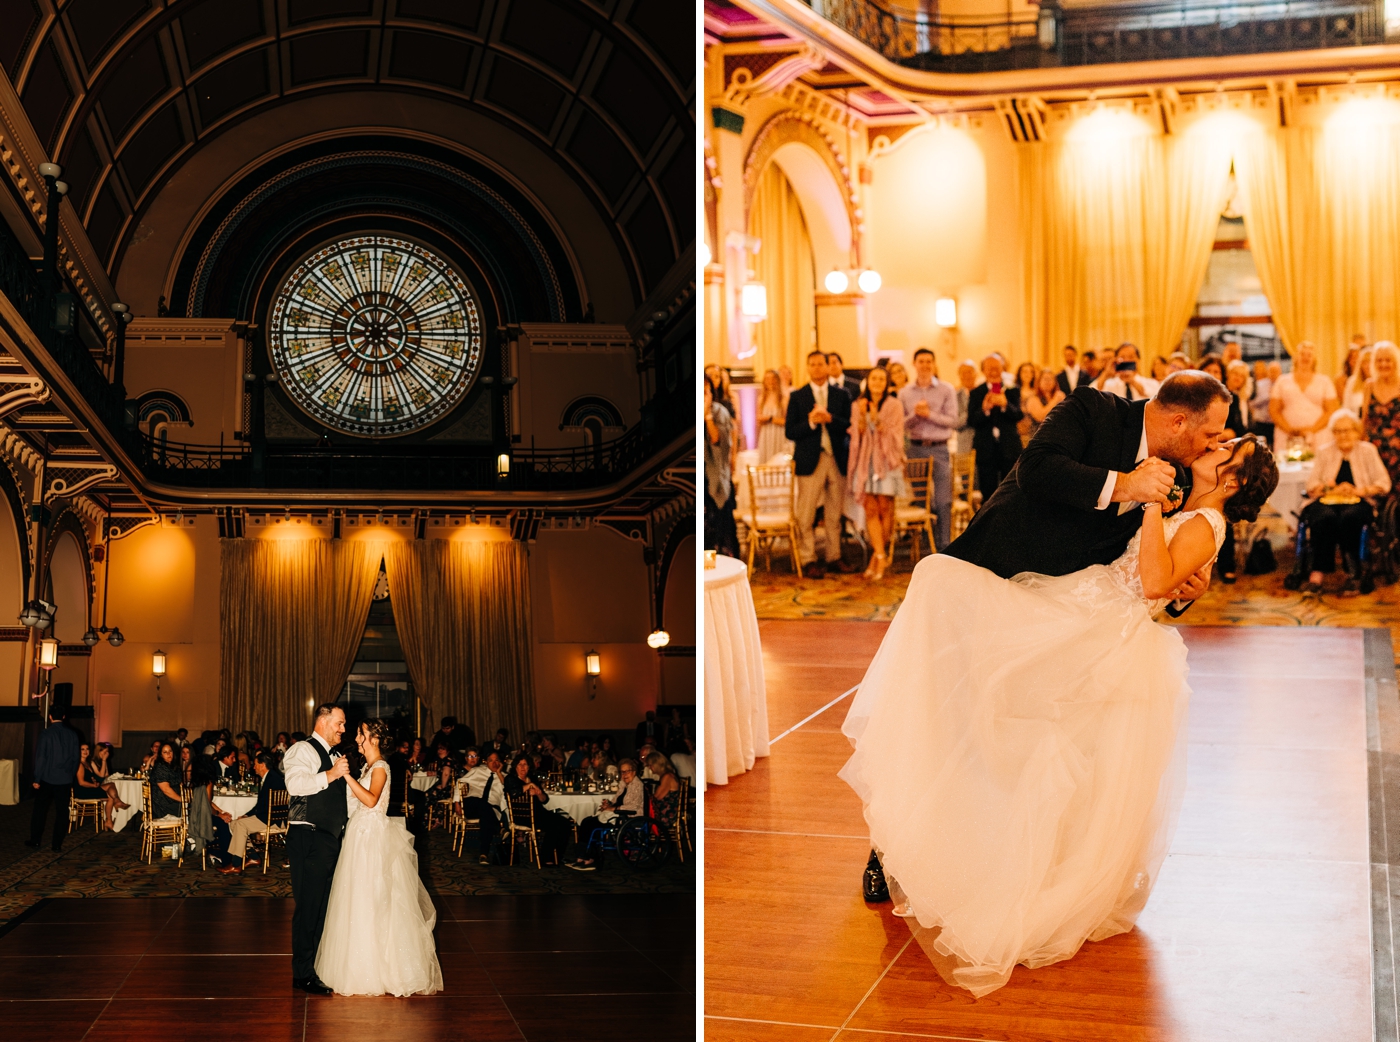 Bride and groom first dance at Union Station